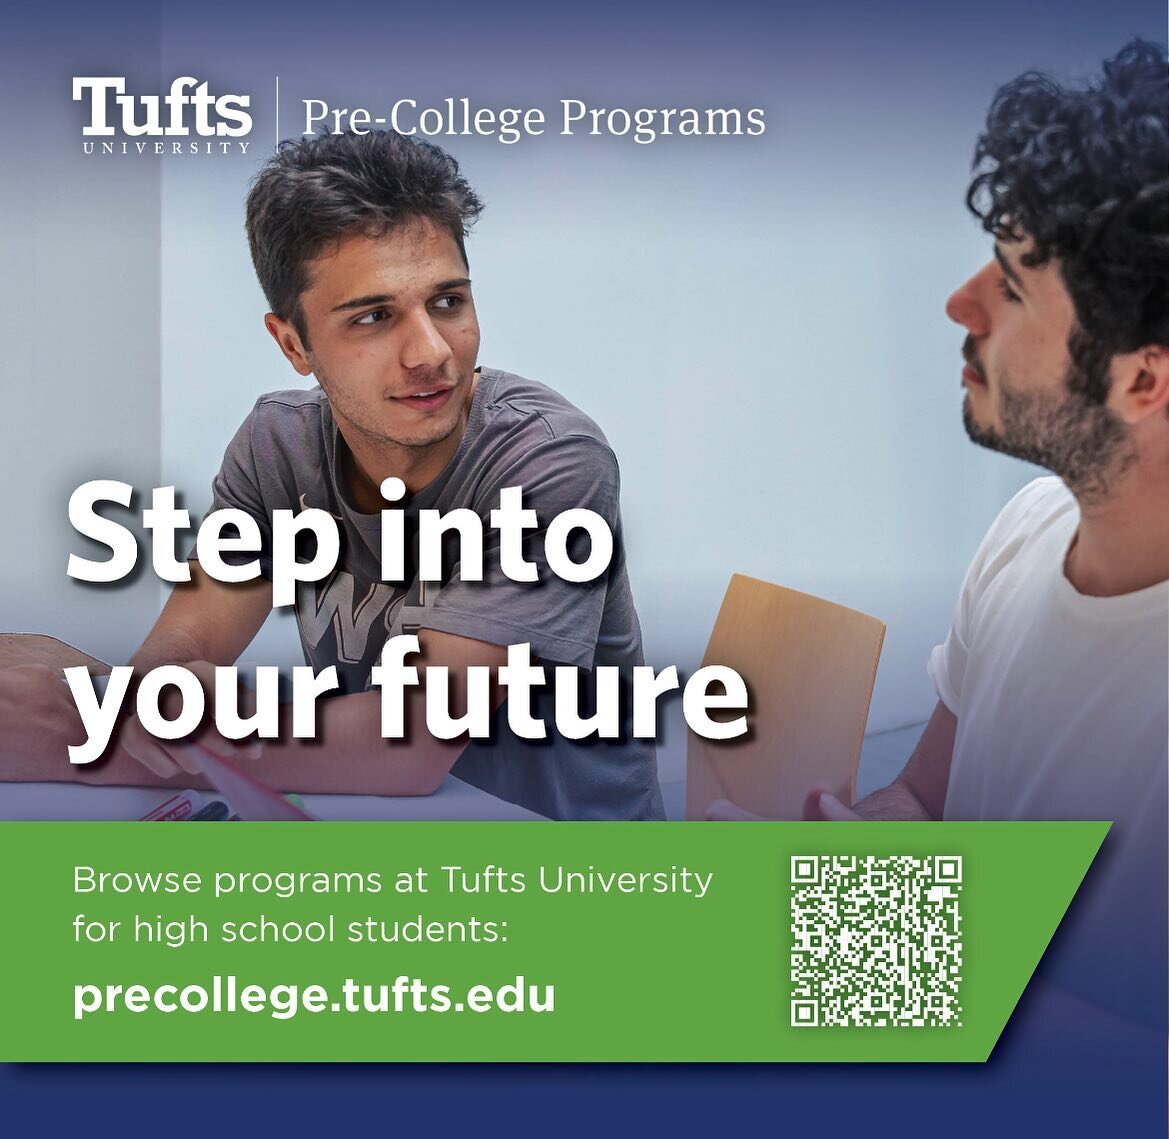 Spend a summer with Tufts Pre-College Programs @tuftsprecollege to dive deeper into your interests, explore your potential, prepare for your future, and make new connections with high school students from around the world. At Tufts University, you ca